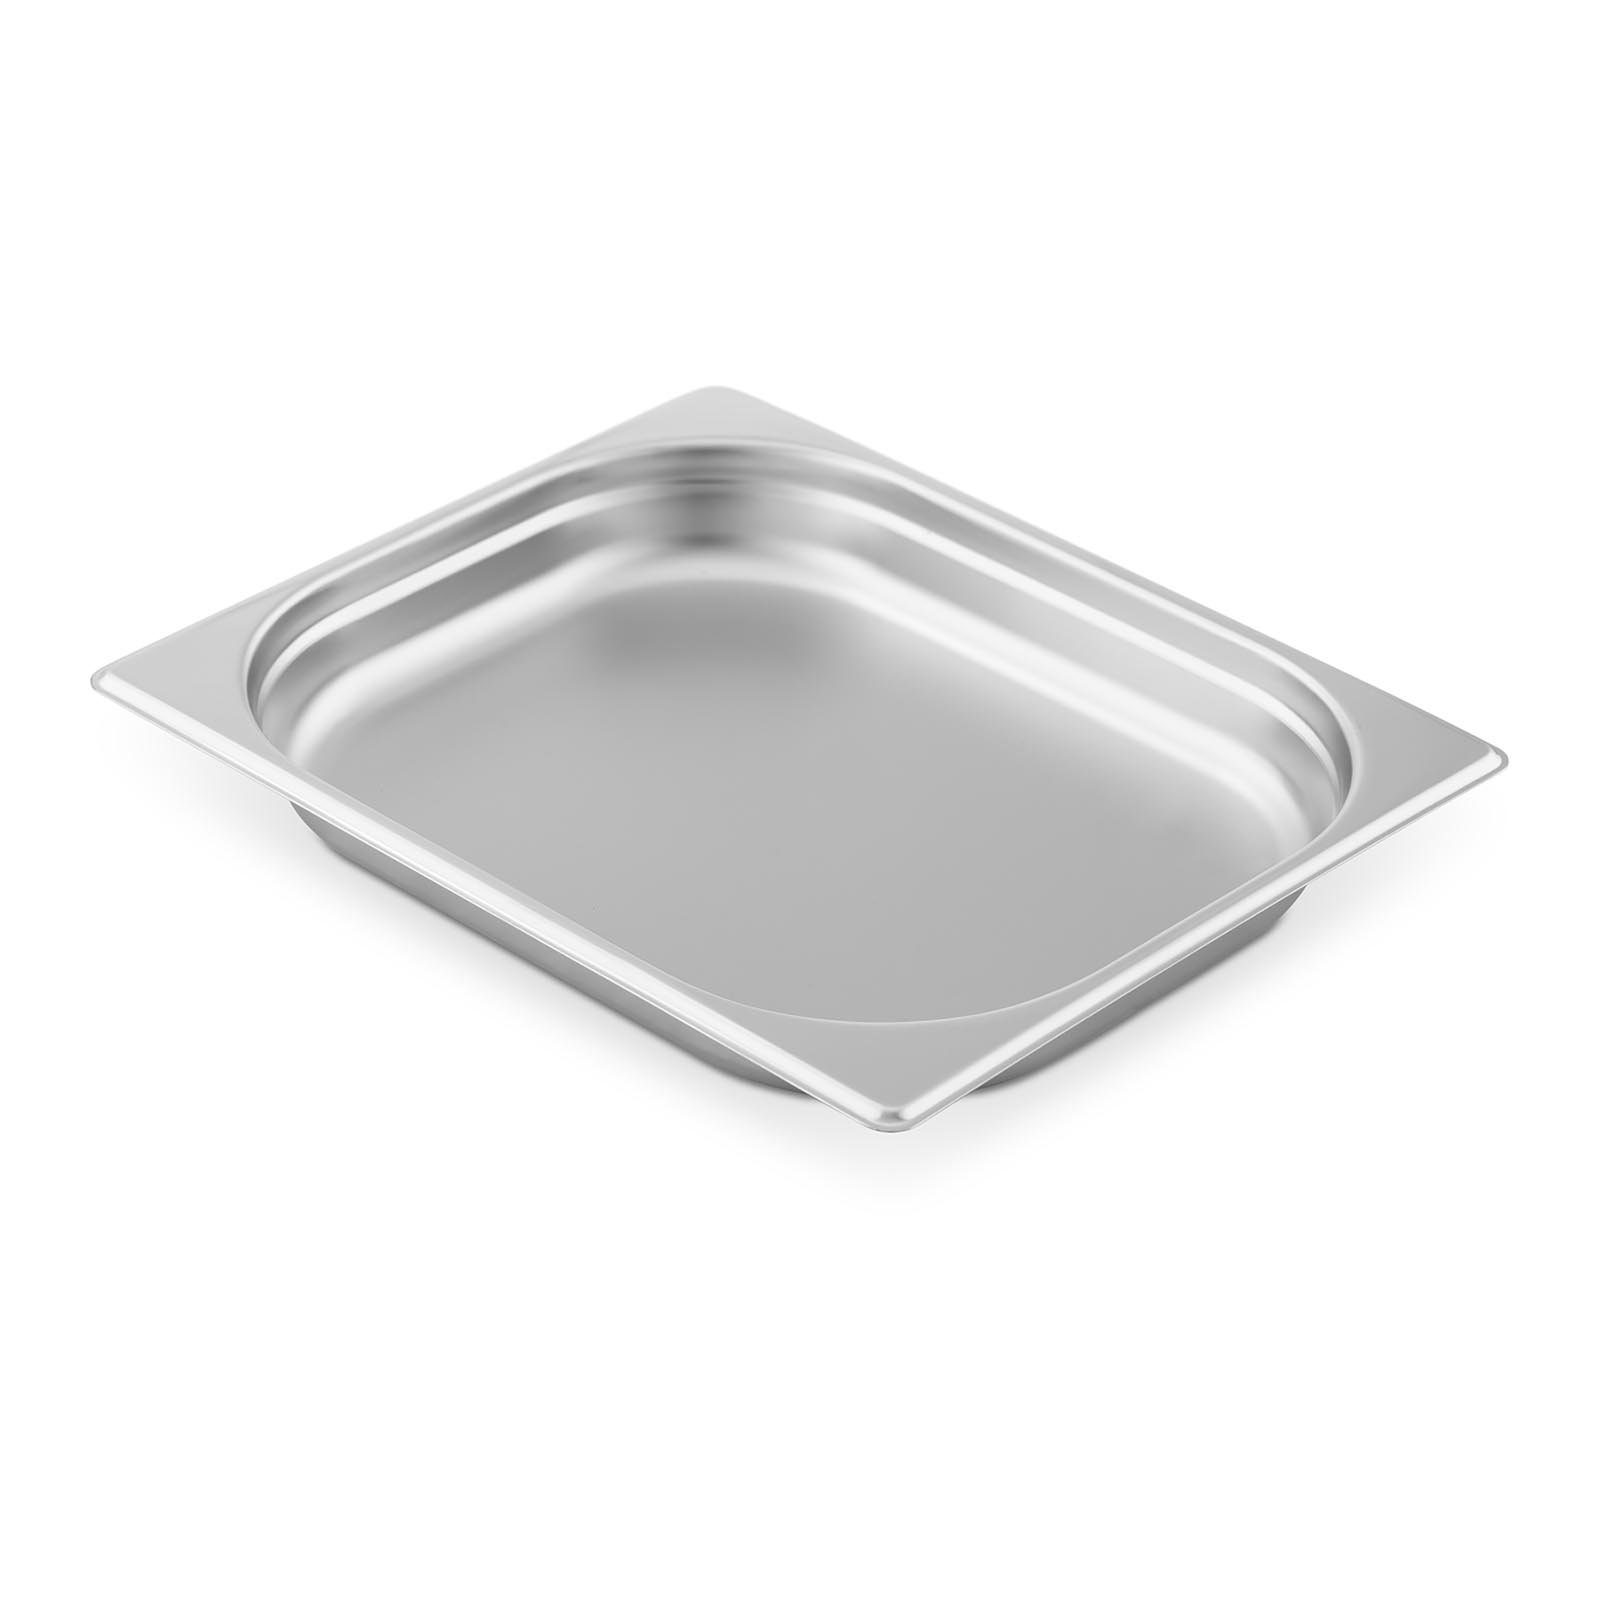 Behälter Royal Thermobehälter Gastronorm GN spülmaschinenfest Catering 40mm tief Marie Bain 1/2